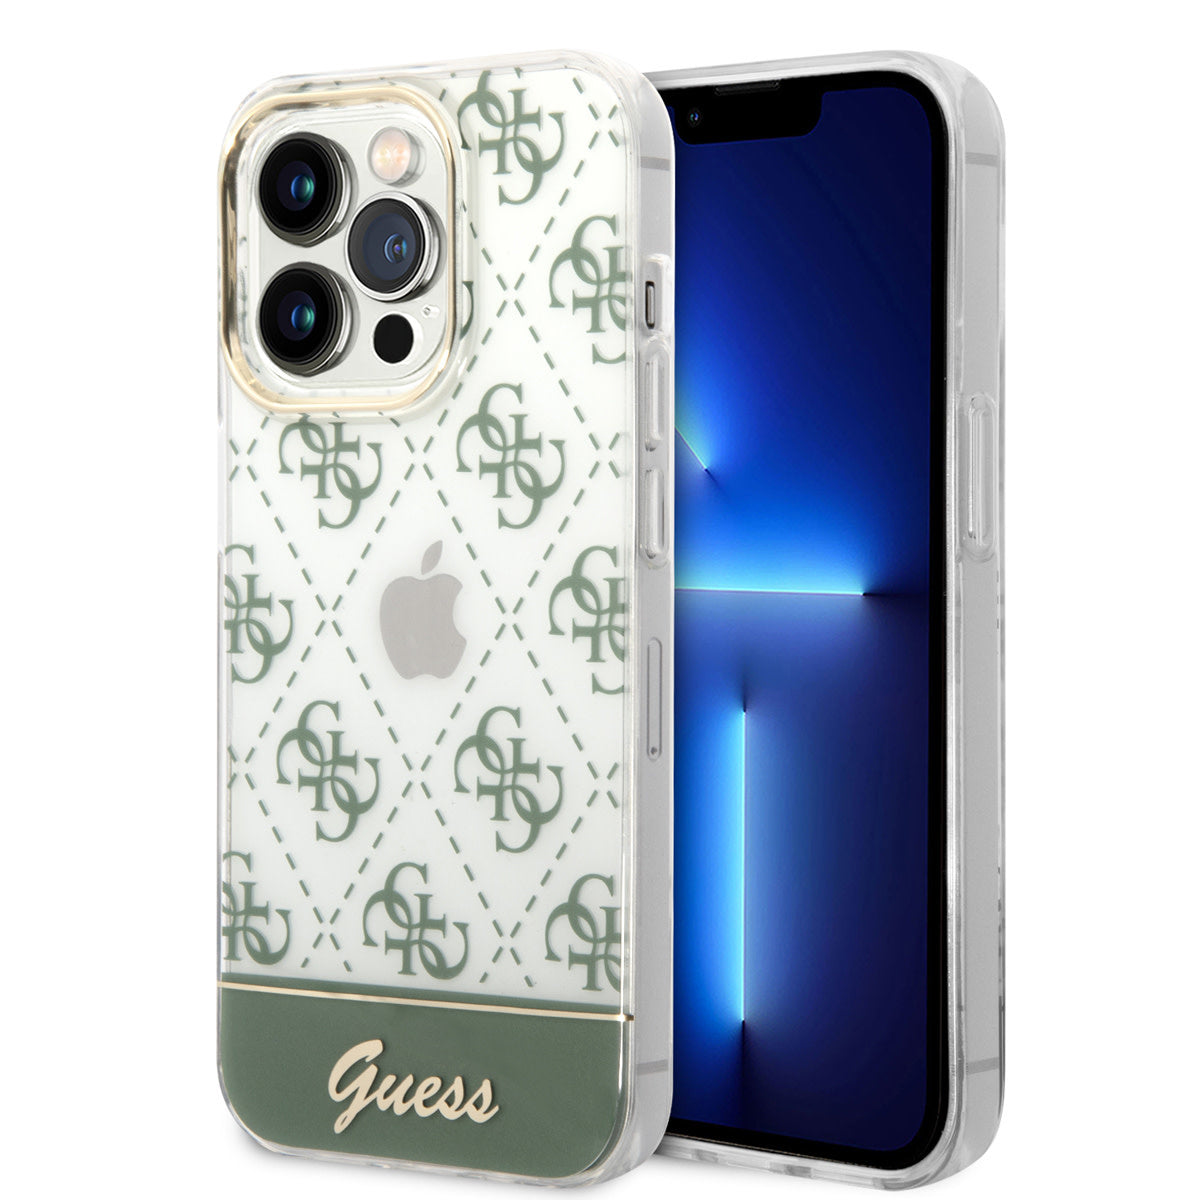 Guess iPhone 14 Pro Max Backcover - 4G Pattern Script - Groen